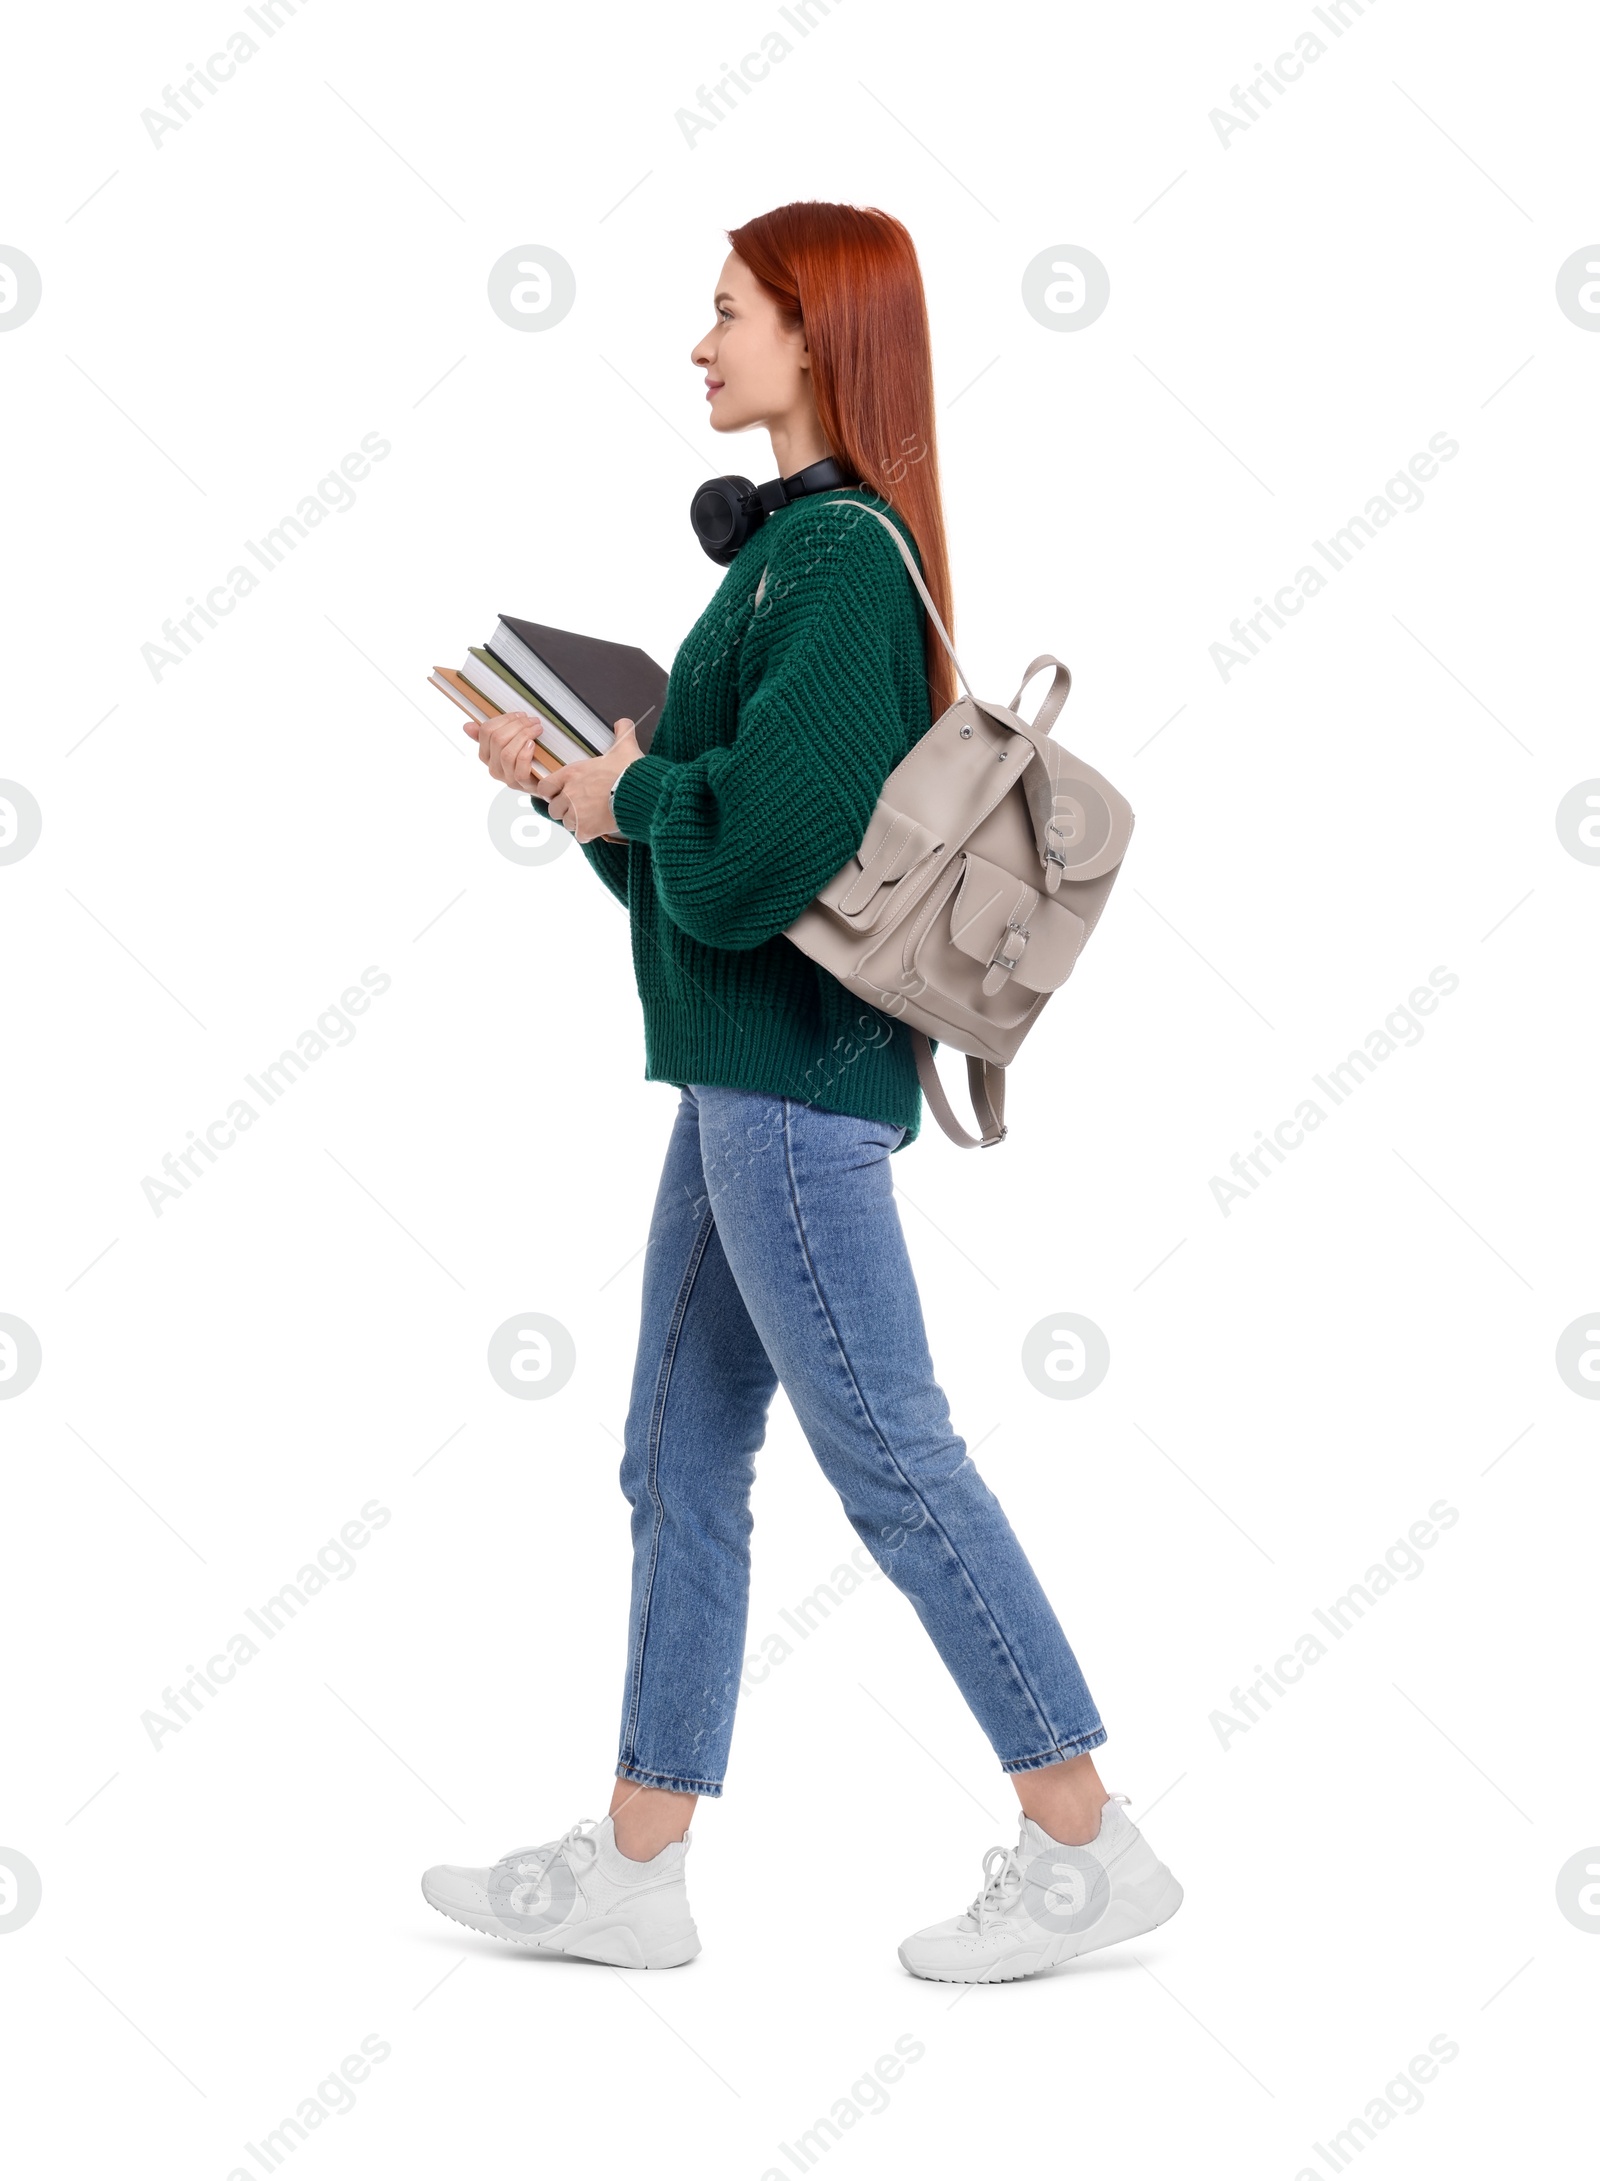 Photo of Woman with backpack and books on white background